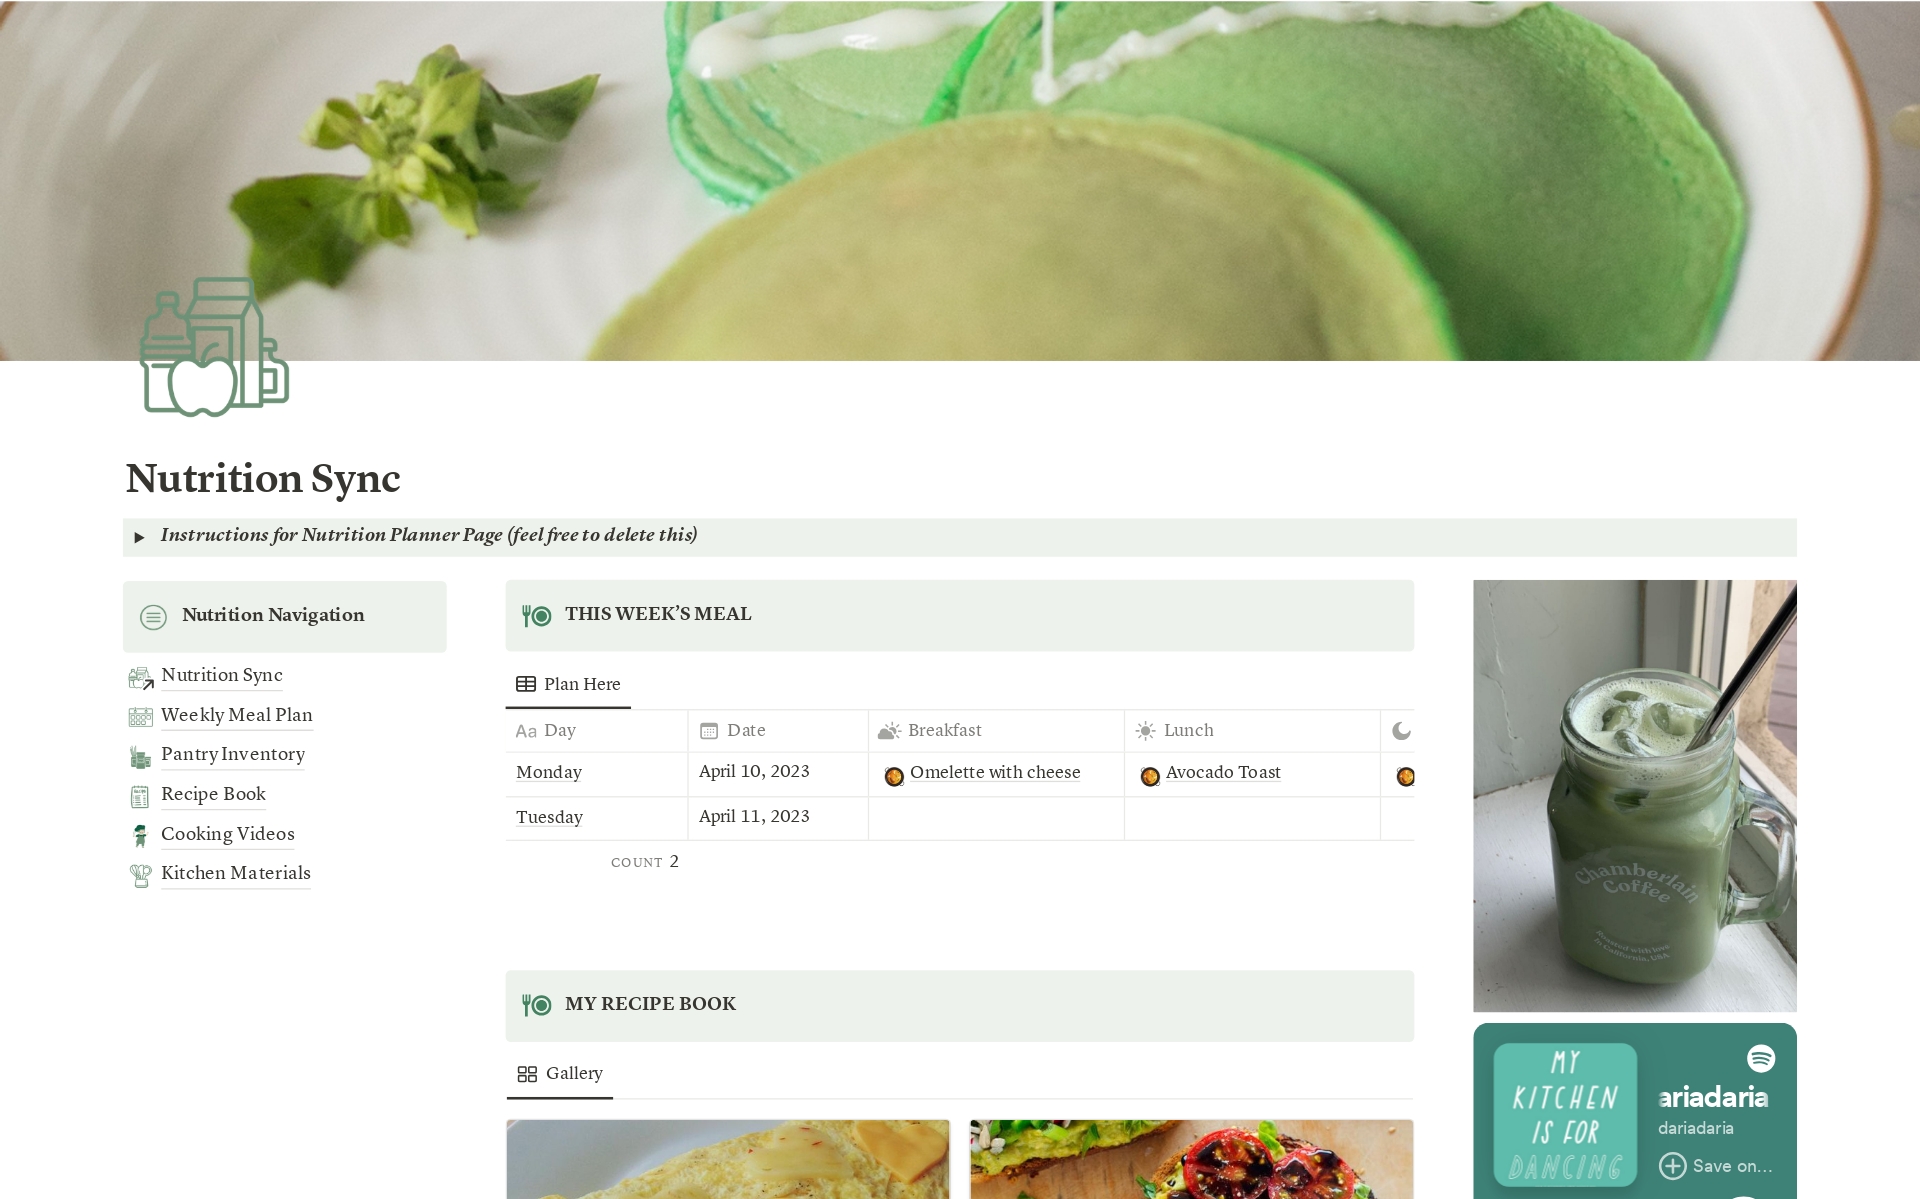 Streamline your meal planning with this easy-to-use Notion template. Organize recipes, track grocery lists, and schedule weekly meals efficiently, all in one convenient, customizable digital space.